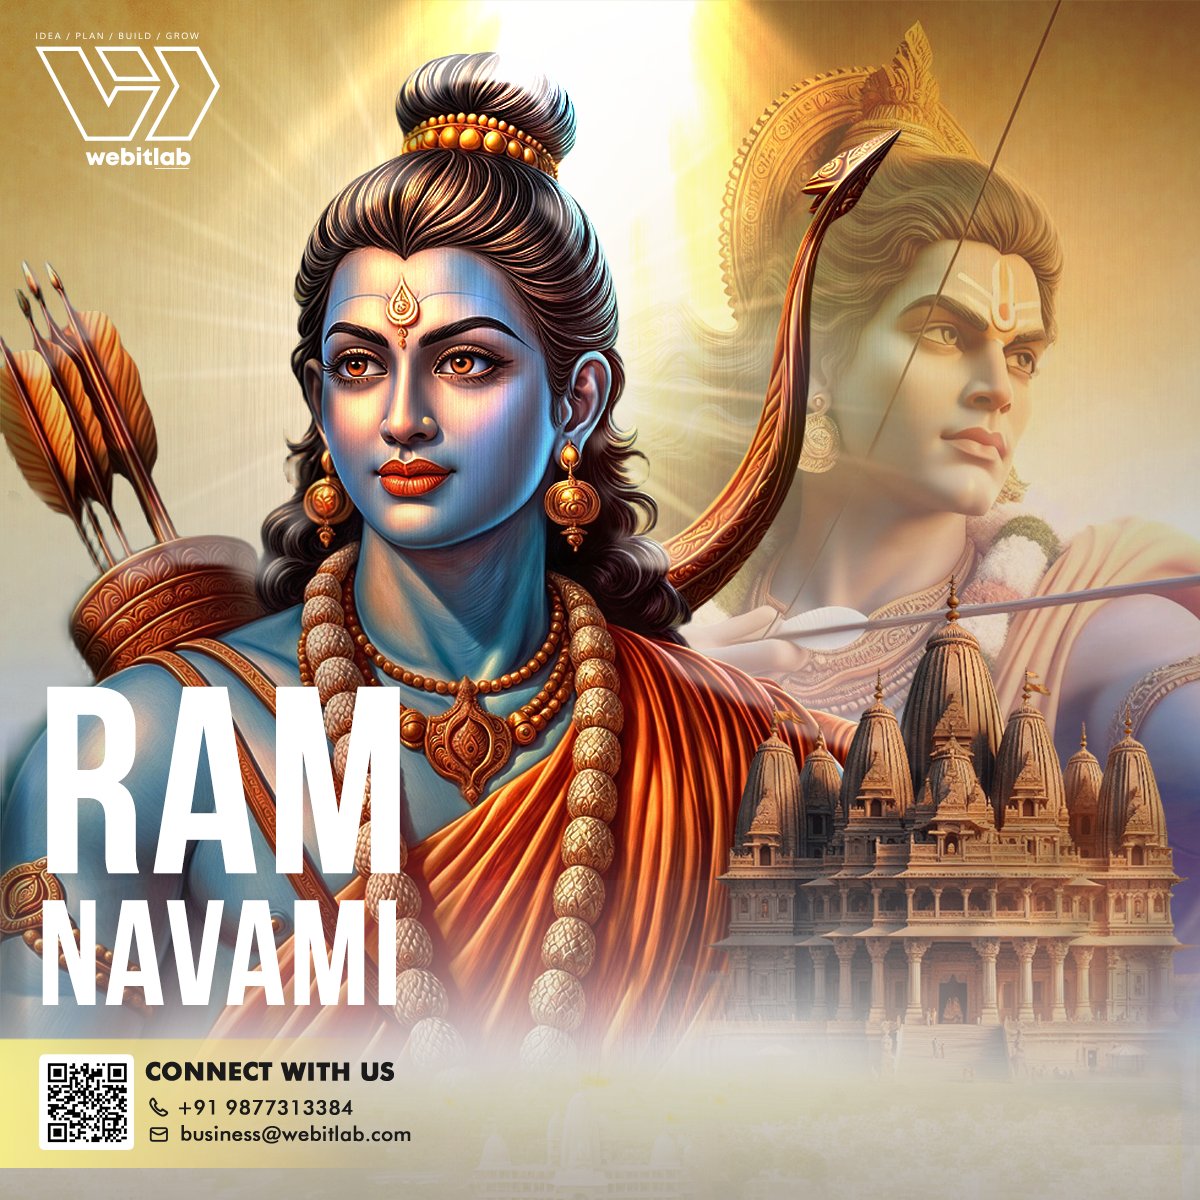 Happy Ram Navami!! May the blessings of Lord Ram fill your life with happiness, prosperity, and immense success.

#RamNavami2024 #RamNavamiFestival #RamNavamiCelebrations #UIUXAgency #UIUXDesigns #UIUXServices #DigitalDesignAgency #CreativeUIUX #UserExperienceDesign